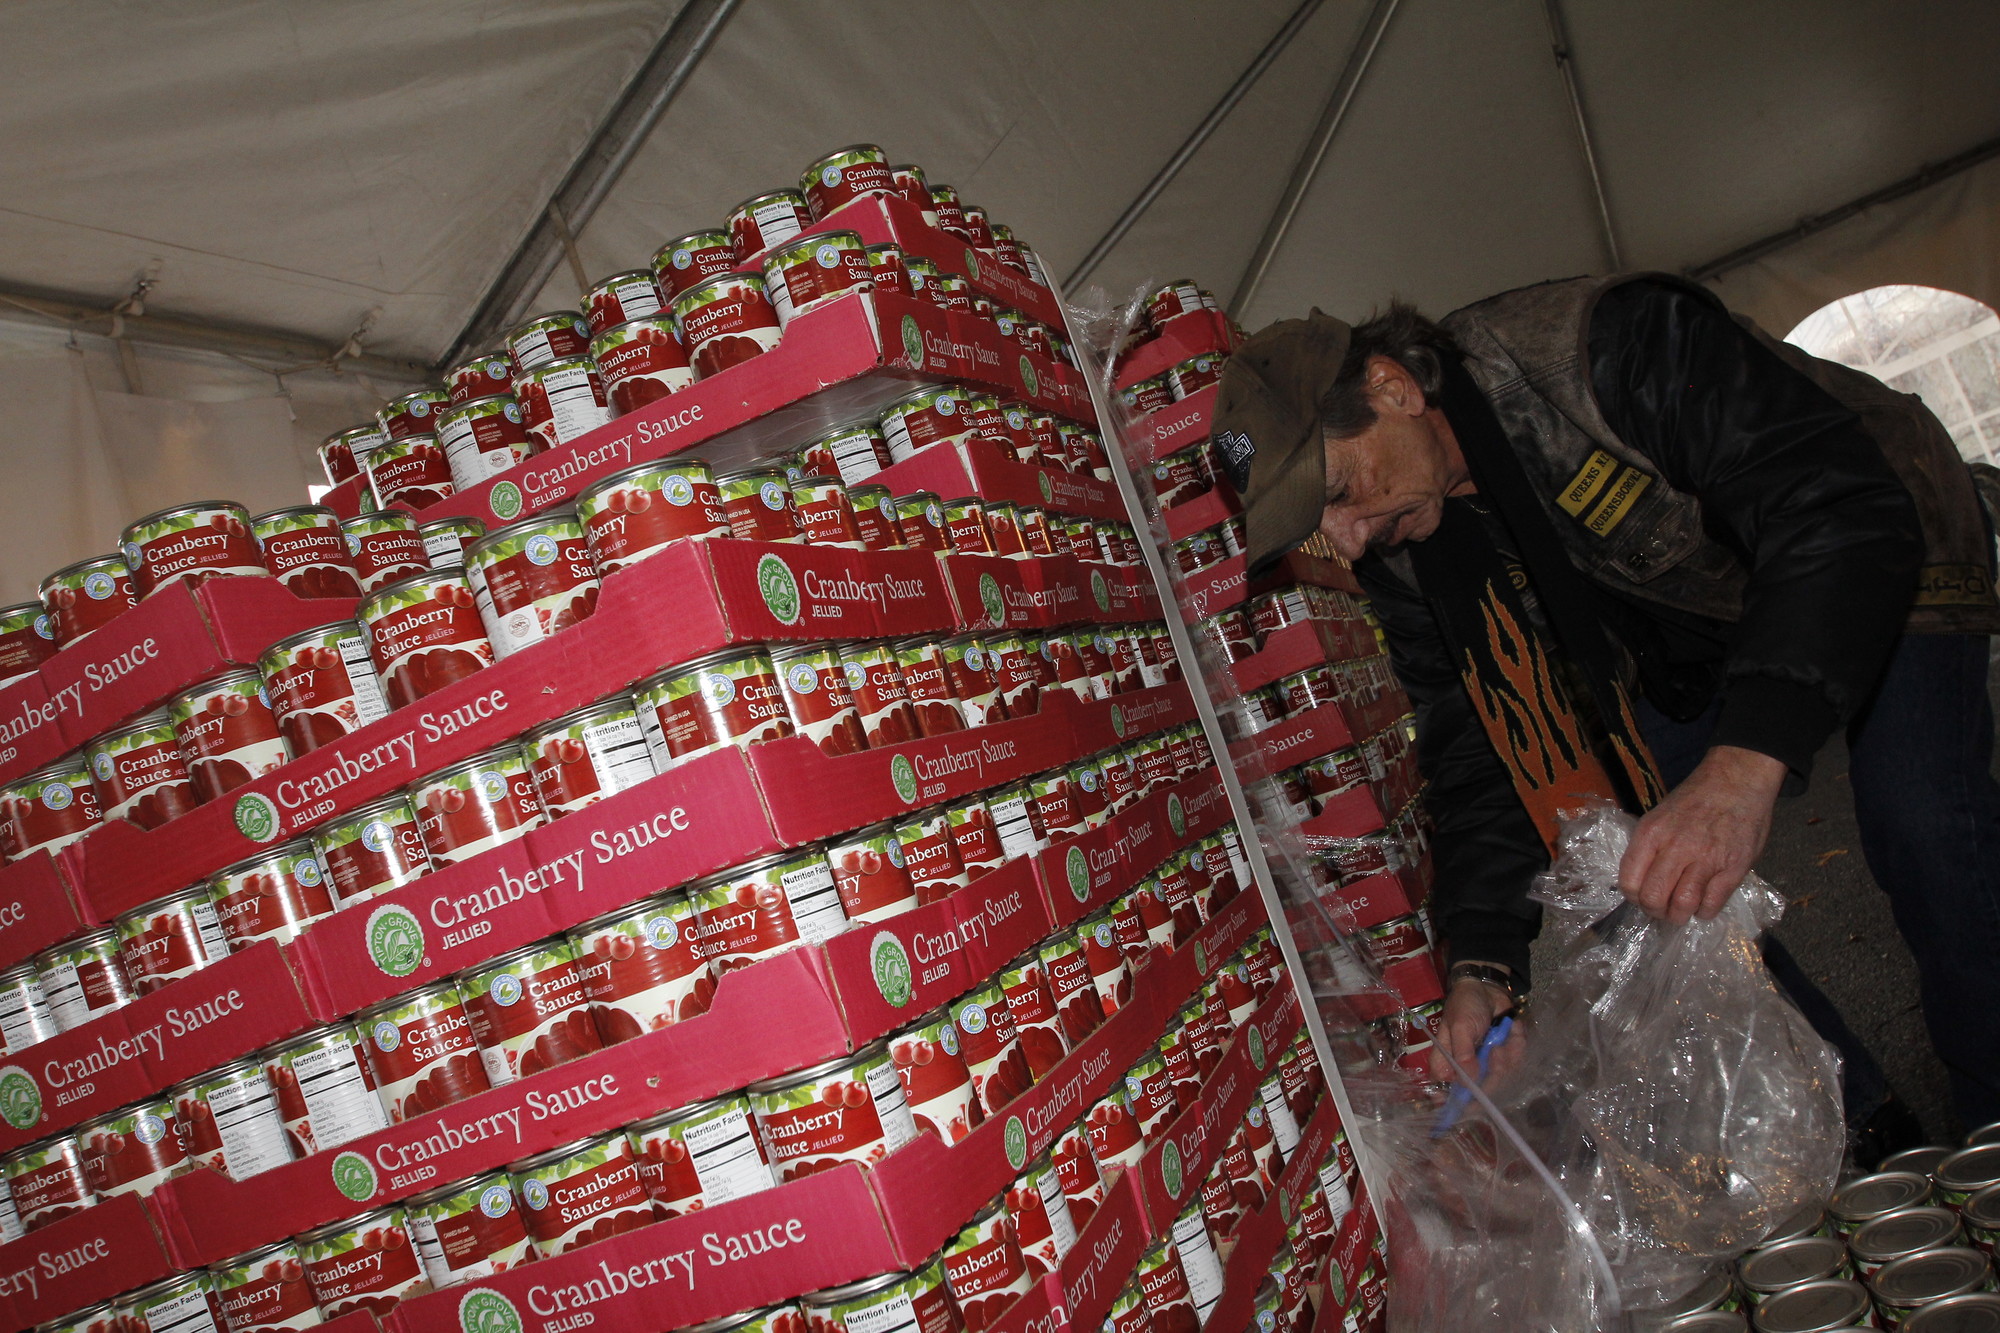 Steve Bibicoff from the QBMC, Queensboro Motorcycle Club, helps unpack a flat of Cranberry Sauce.